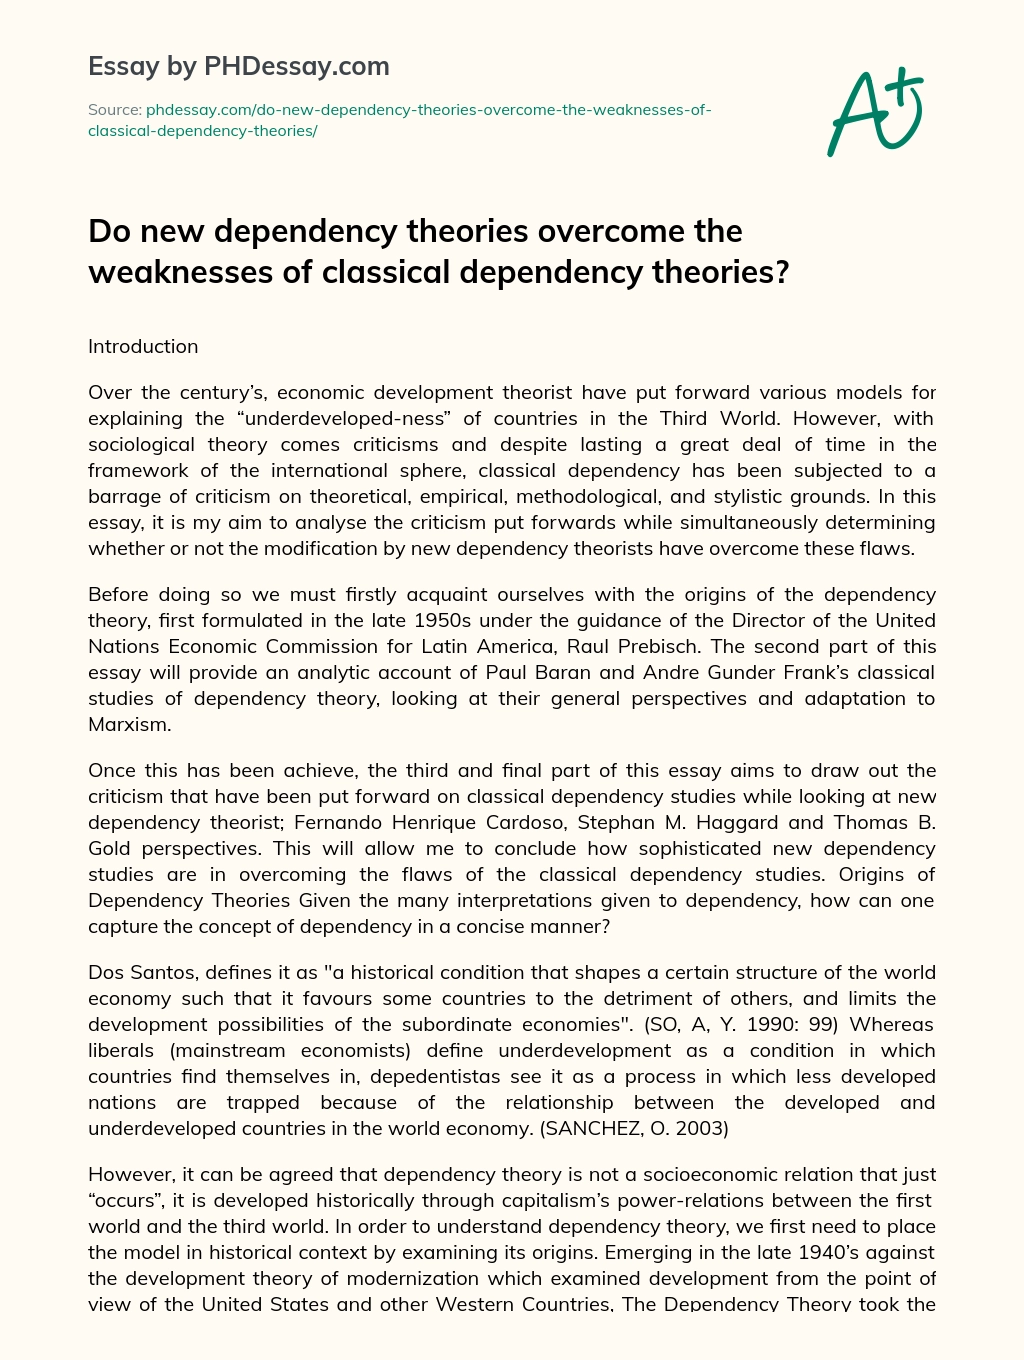 Do new dependency theories overcome the weaknesses of classical dependency theories? essay